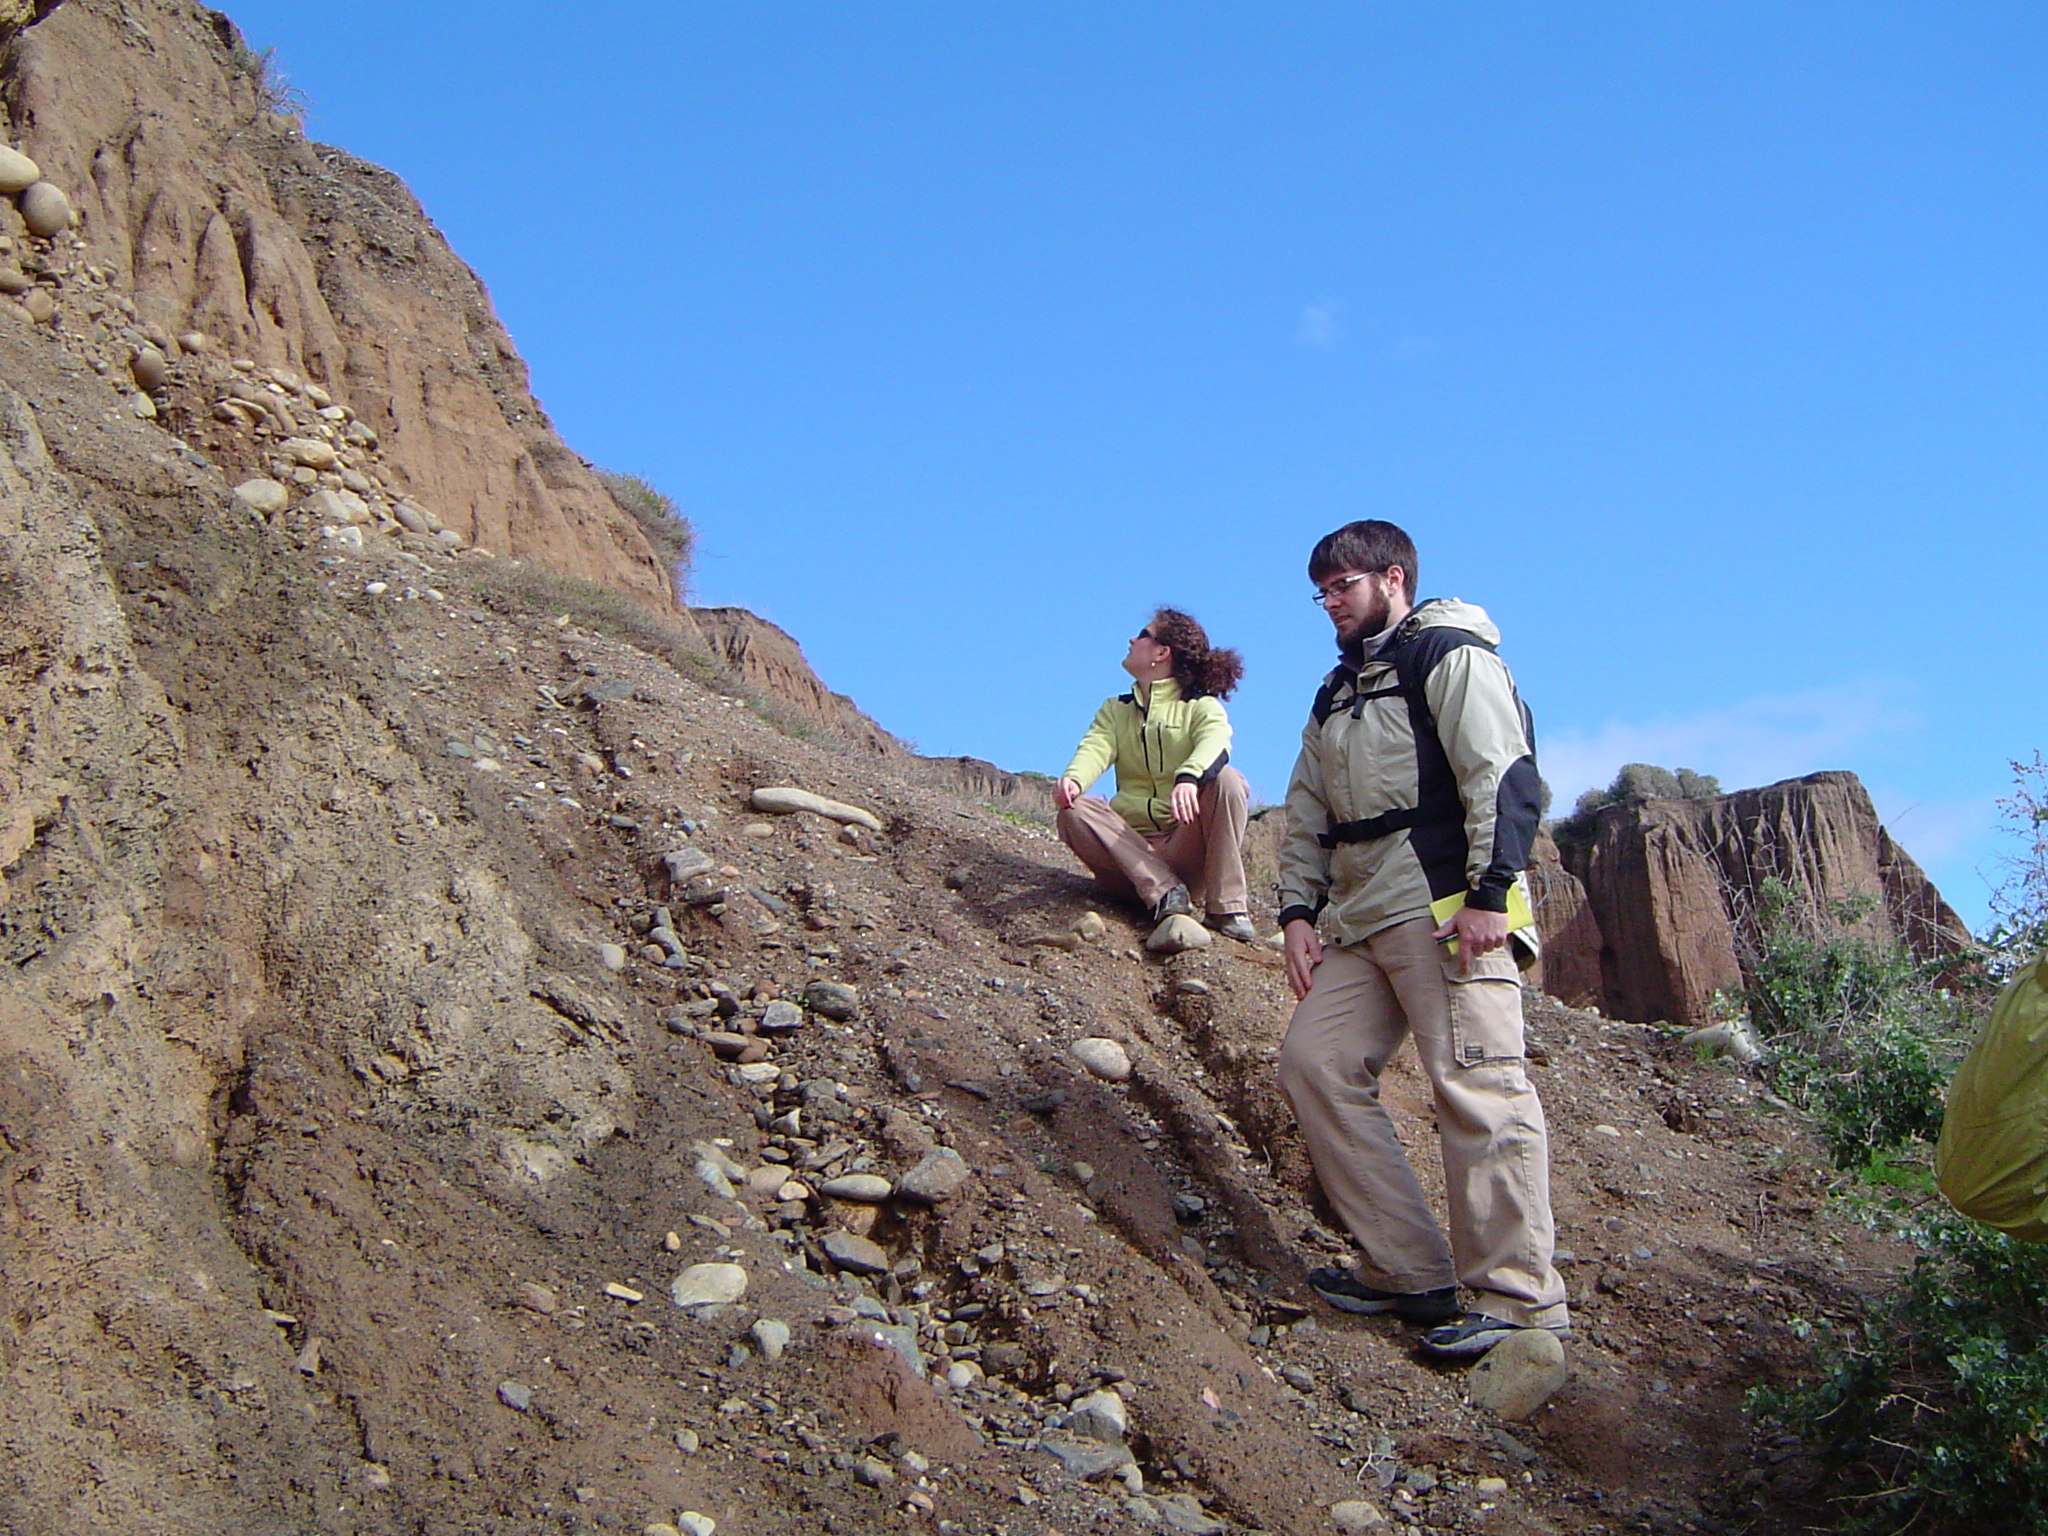 Laura and Scott examining the Fault Line